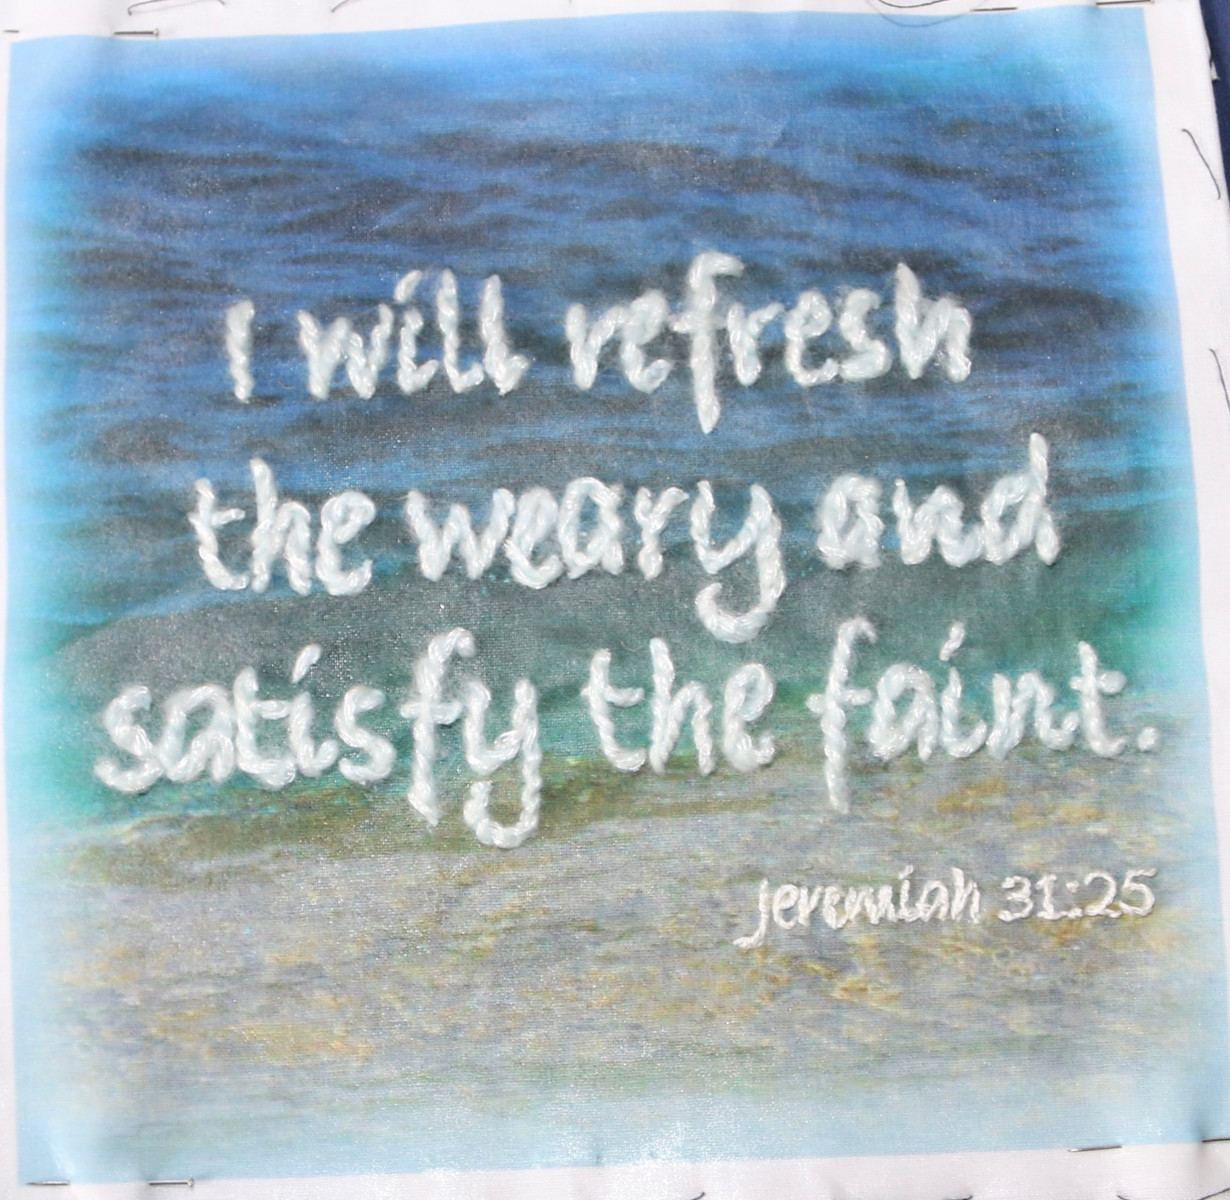 Embroidery of Jeremiah 31vs25 on image of the sea